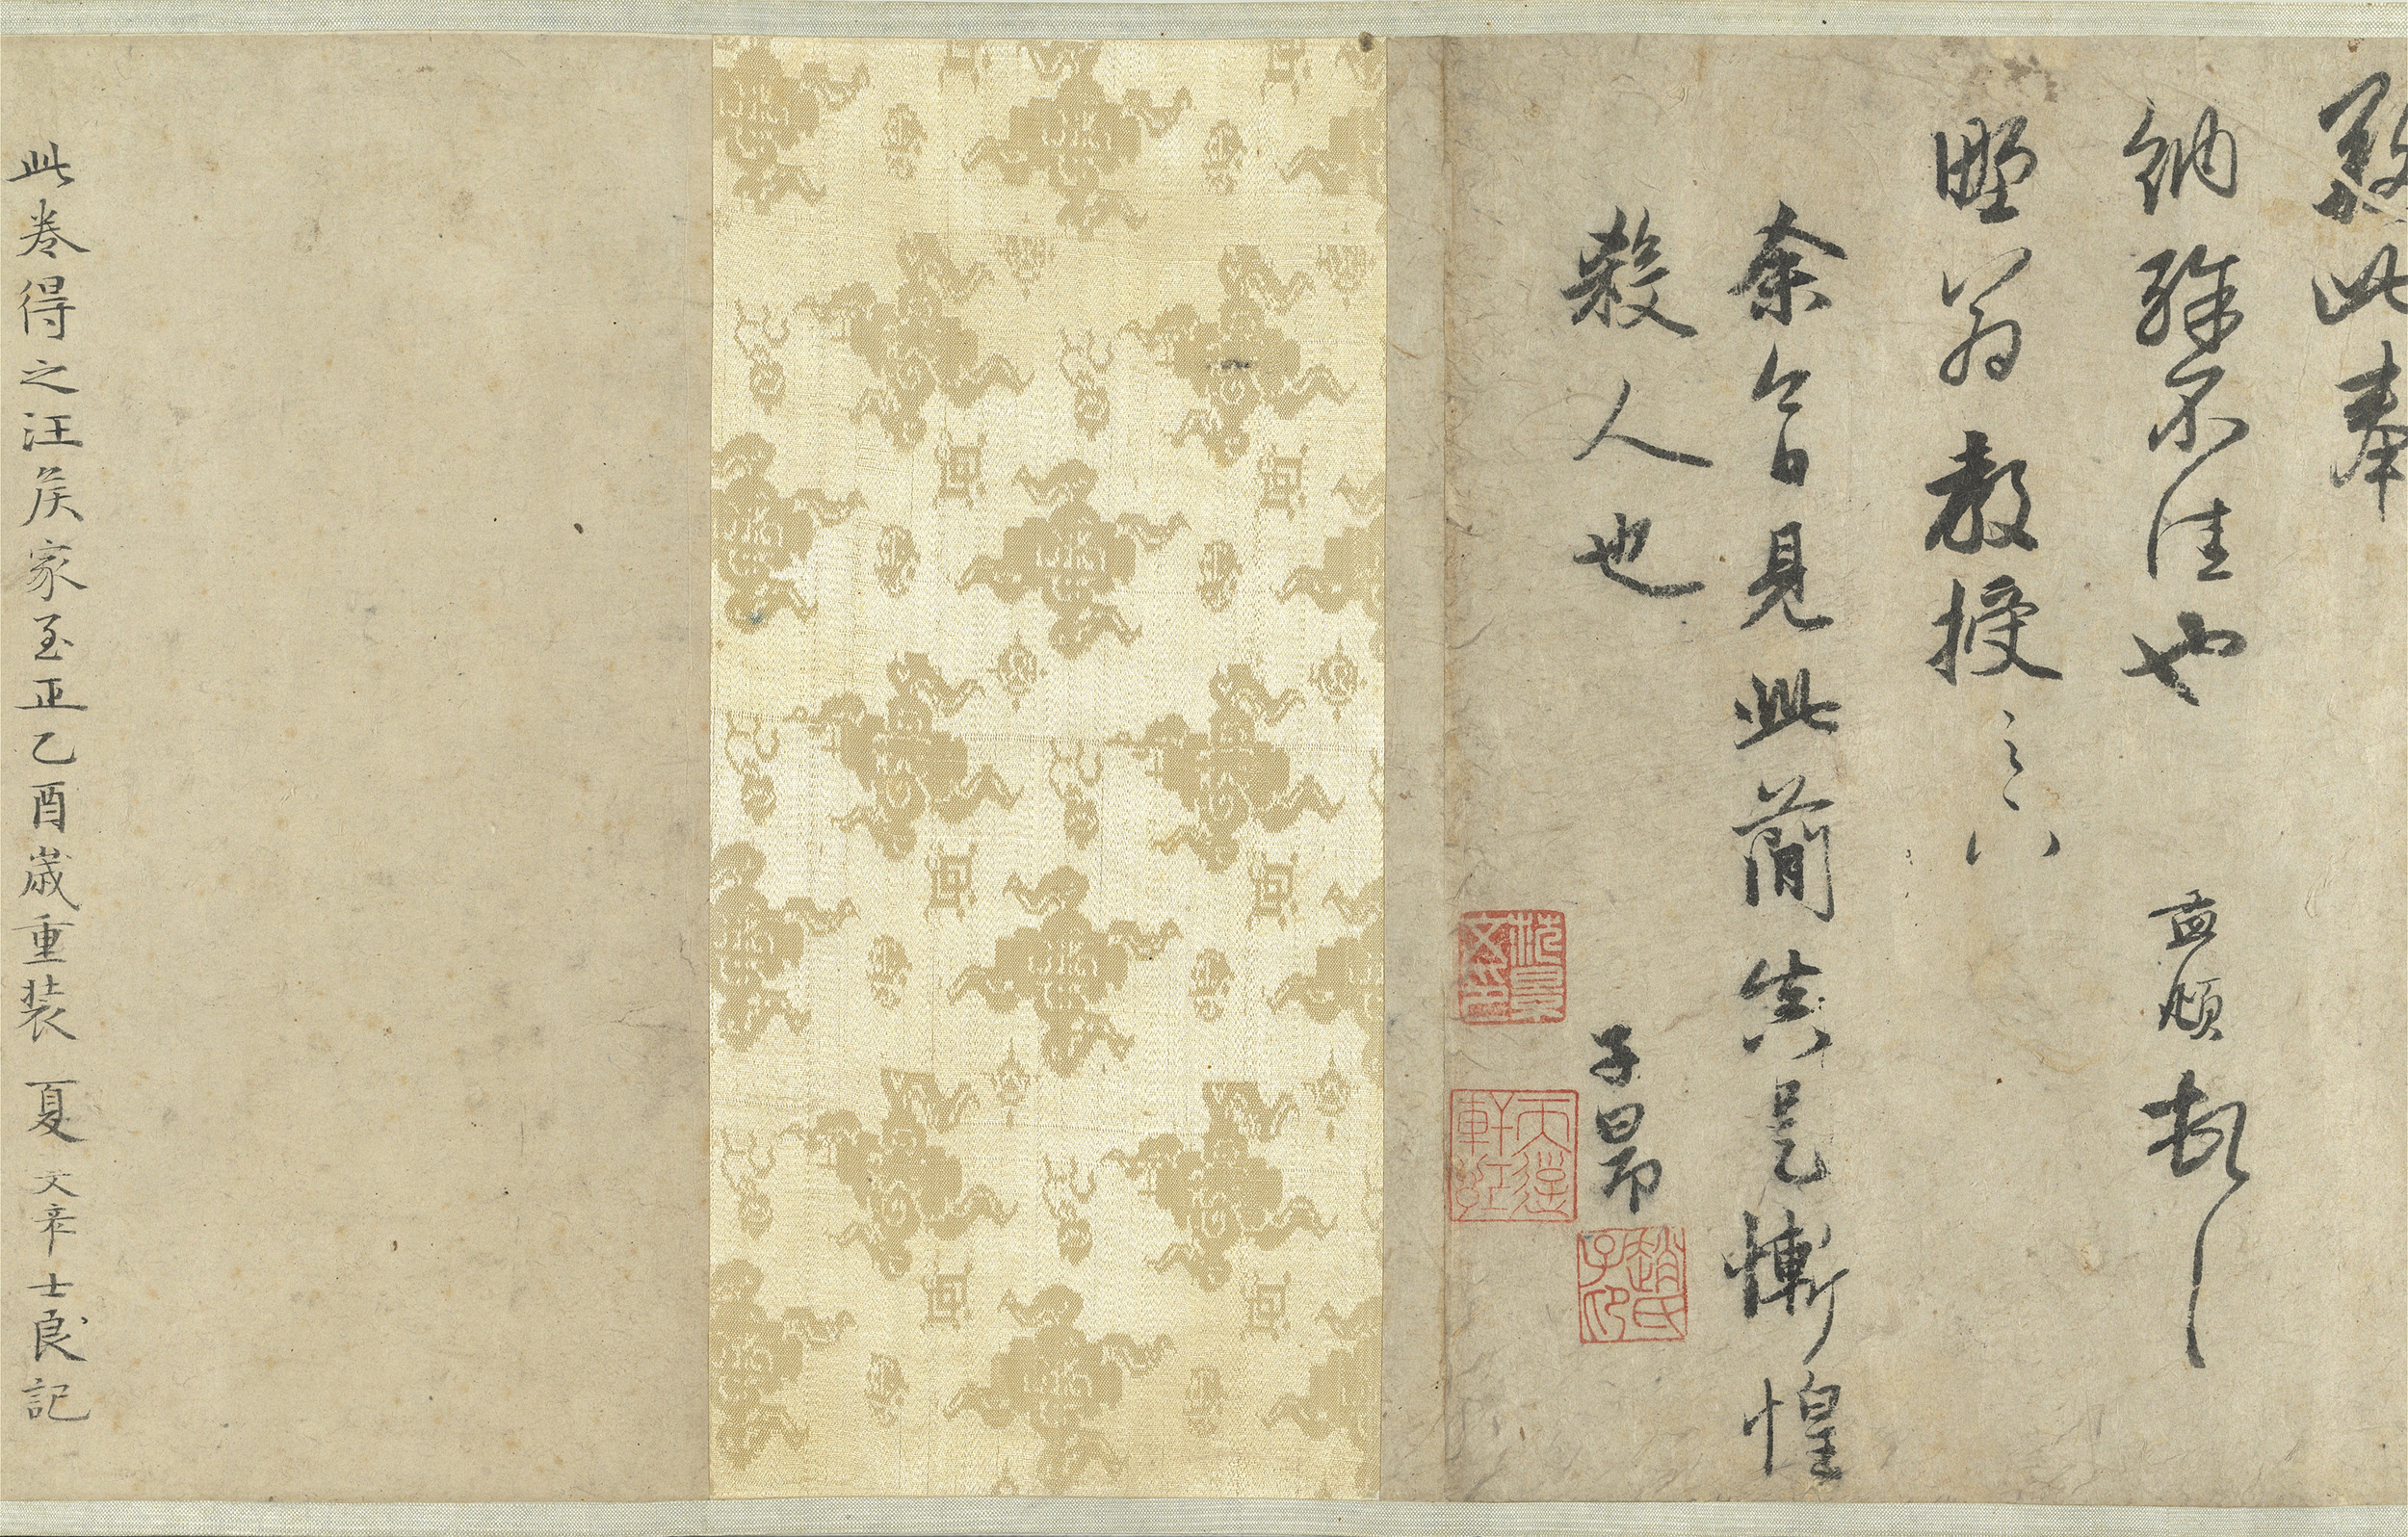 On the Origins of the “Orchid Pavilion Preface”  Zhao Mengfu, Yuan dynasty